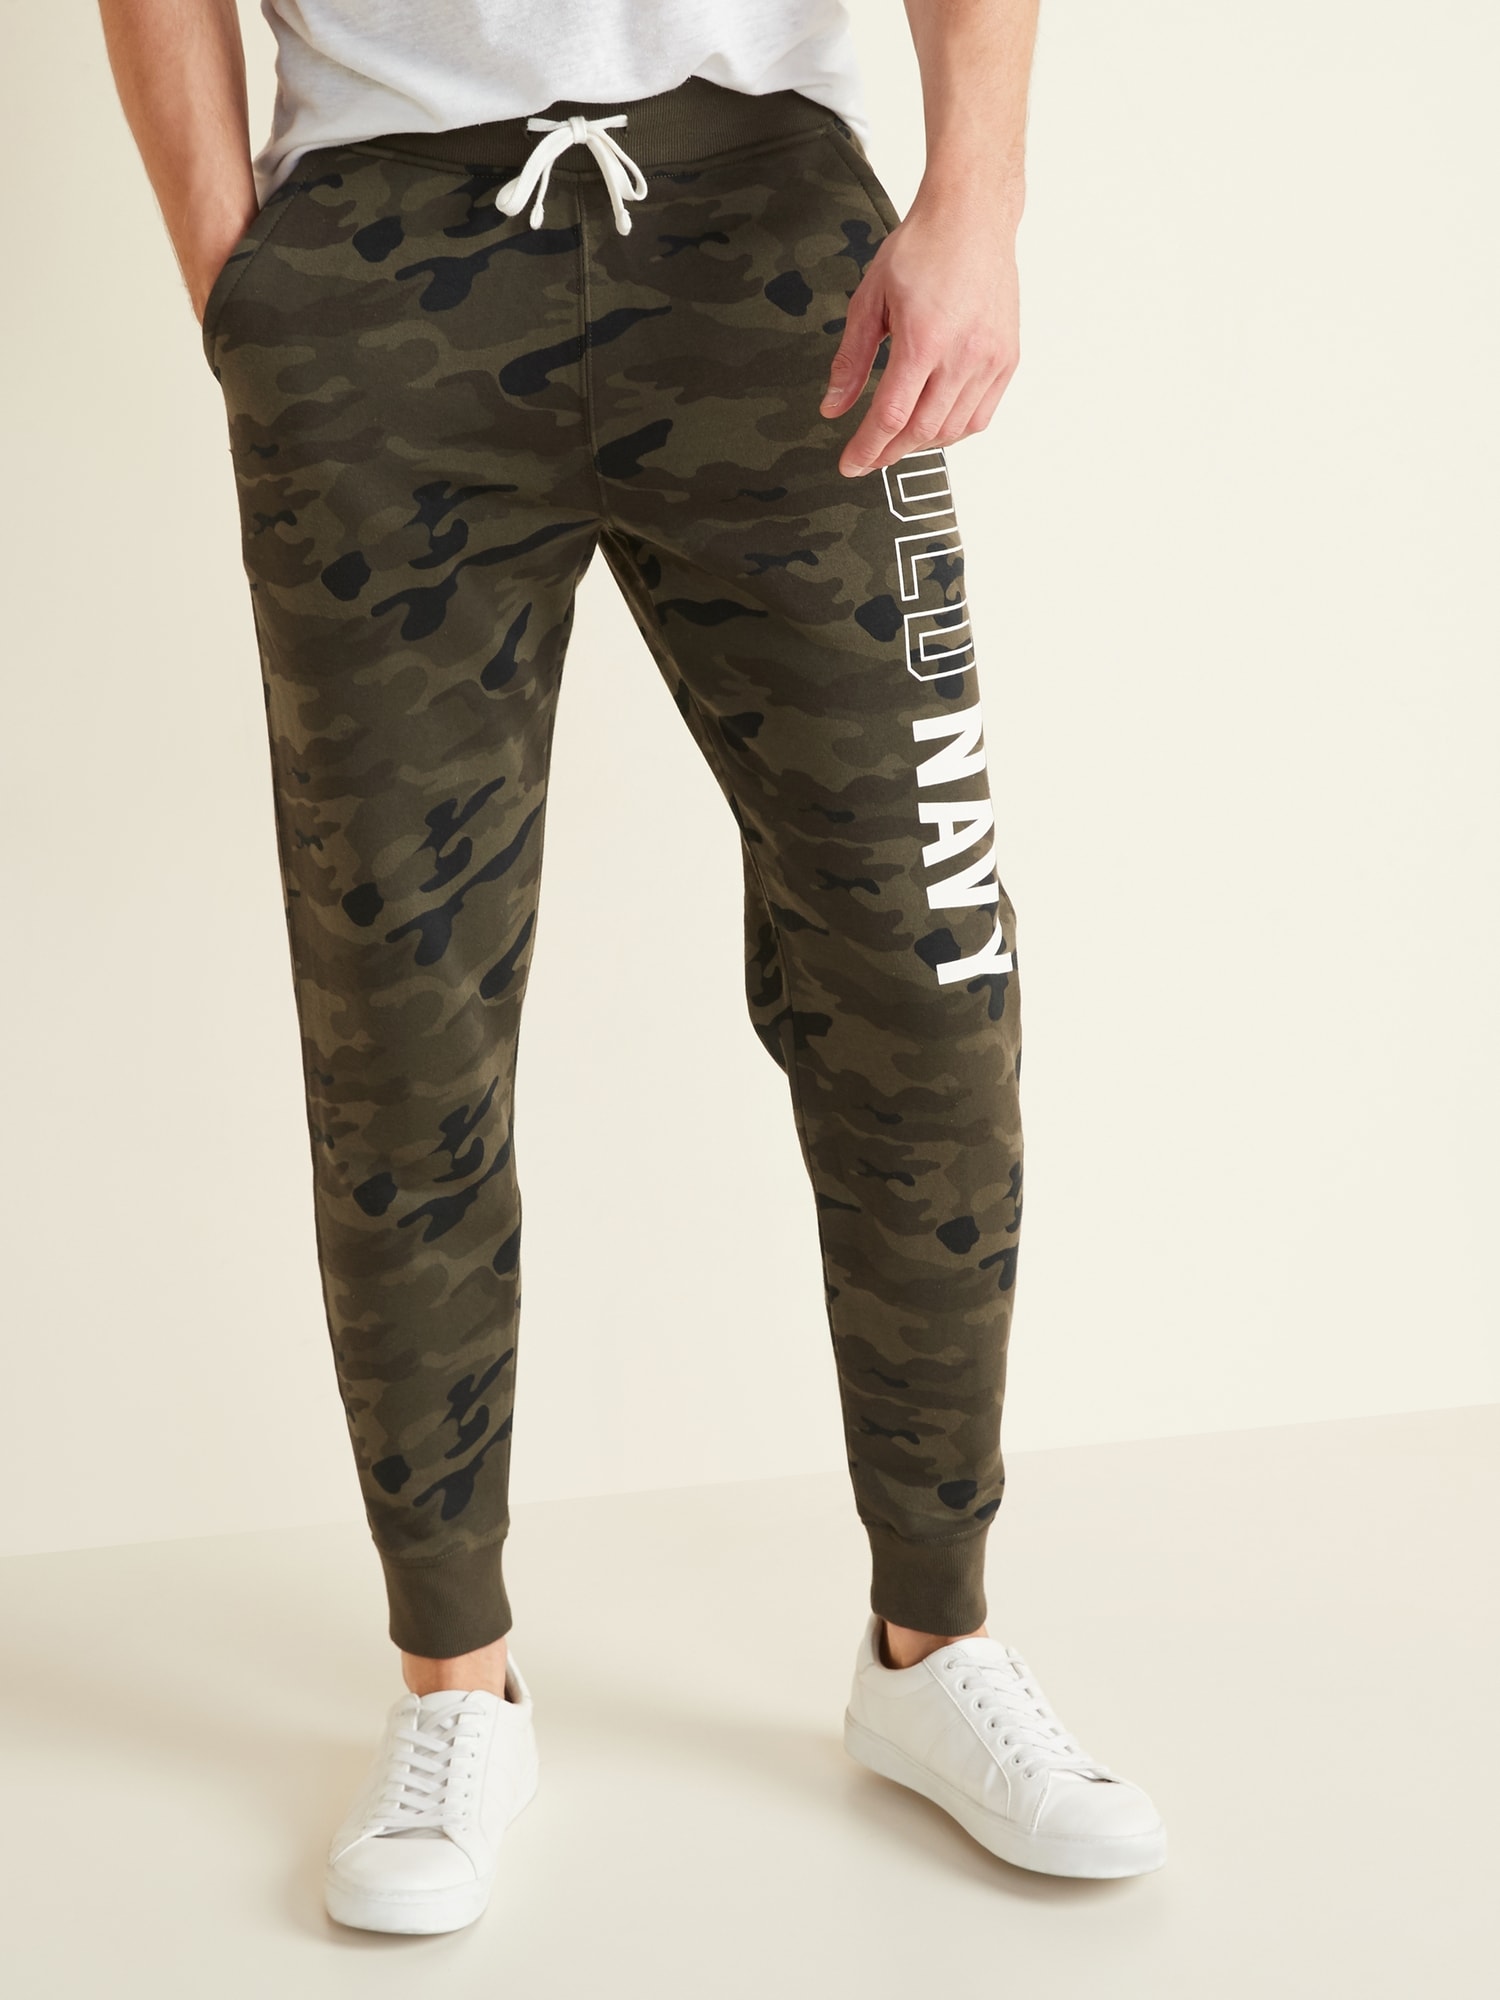 camouflage tracksuit mens